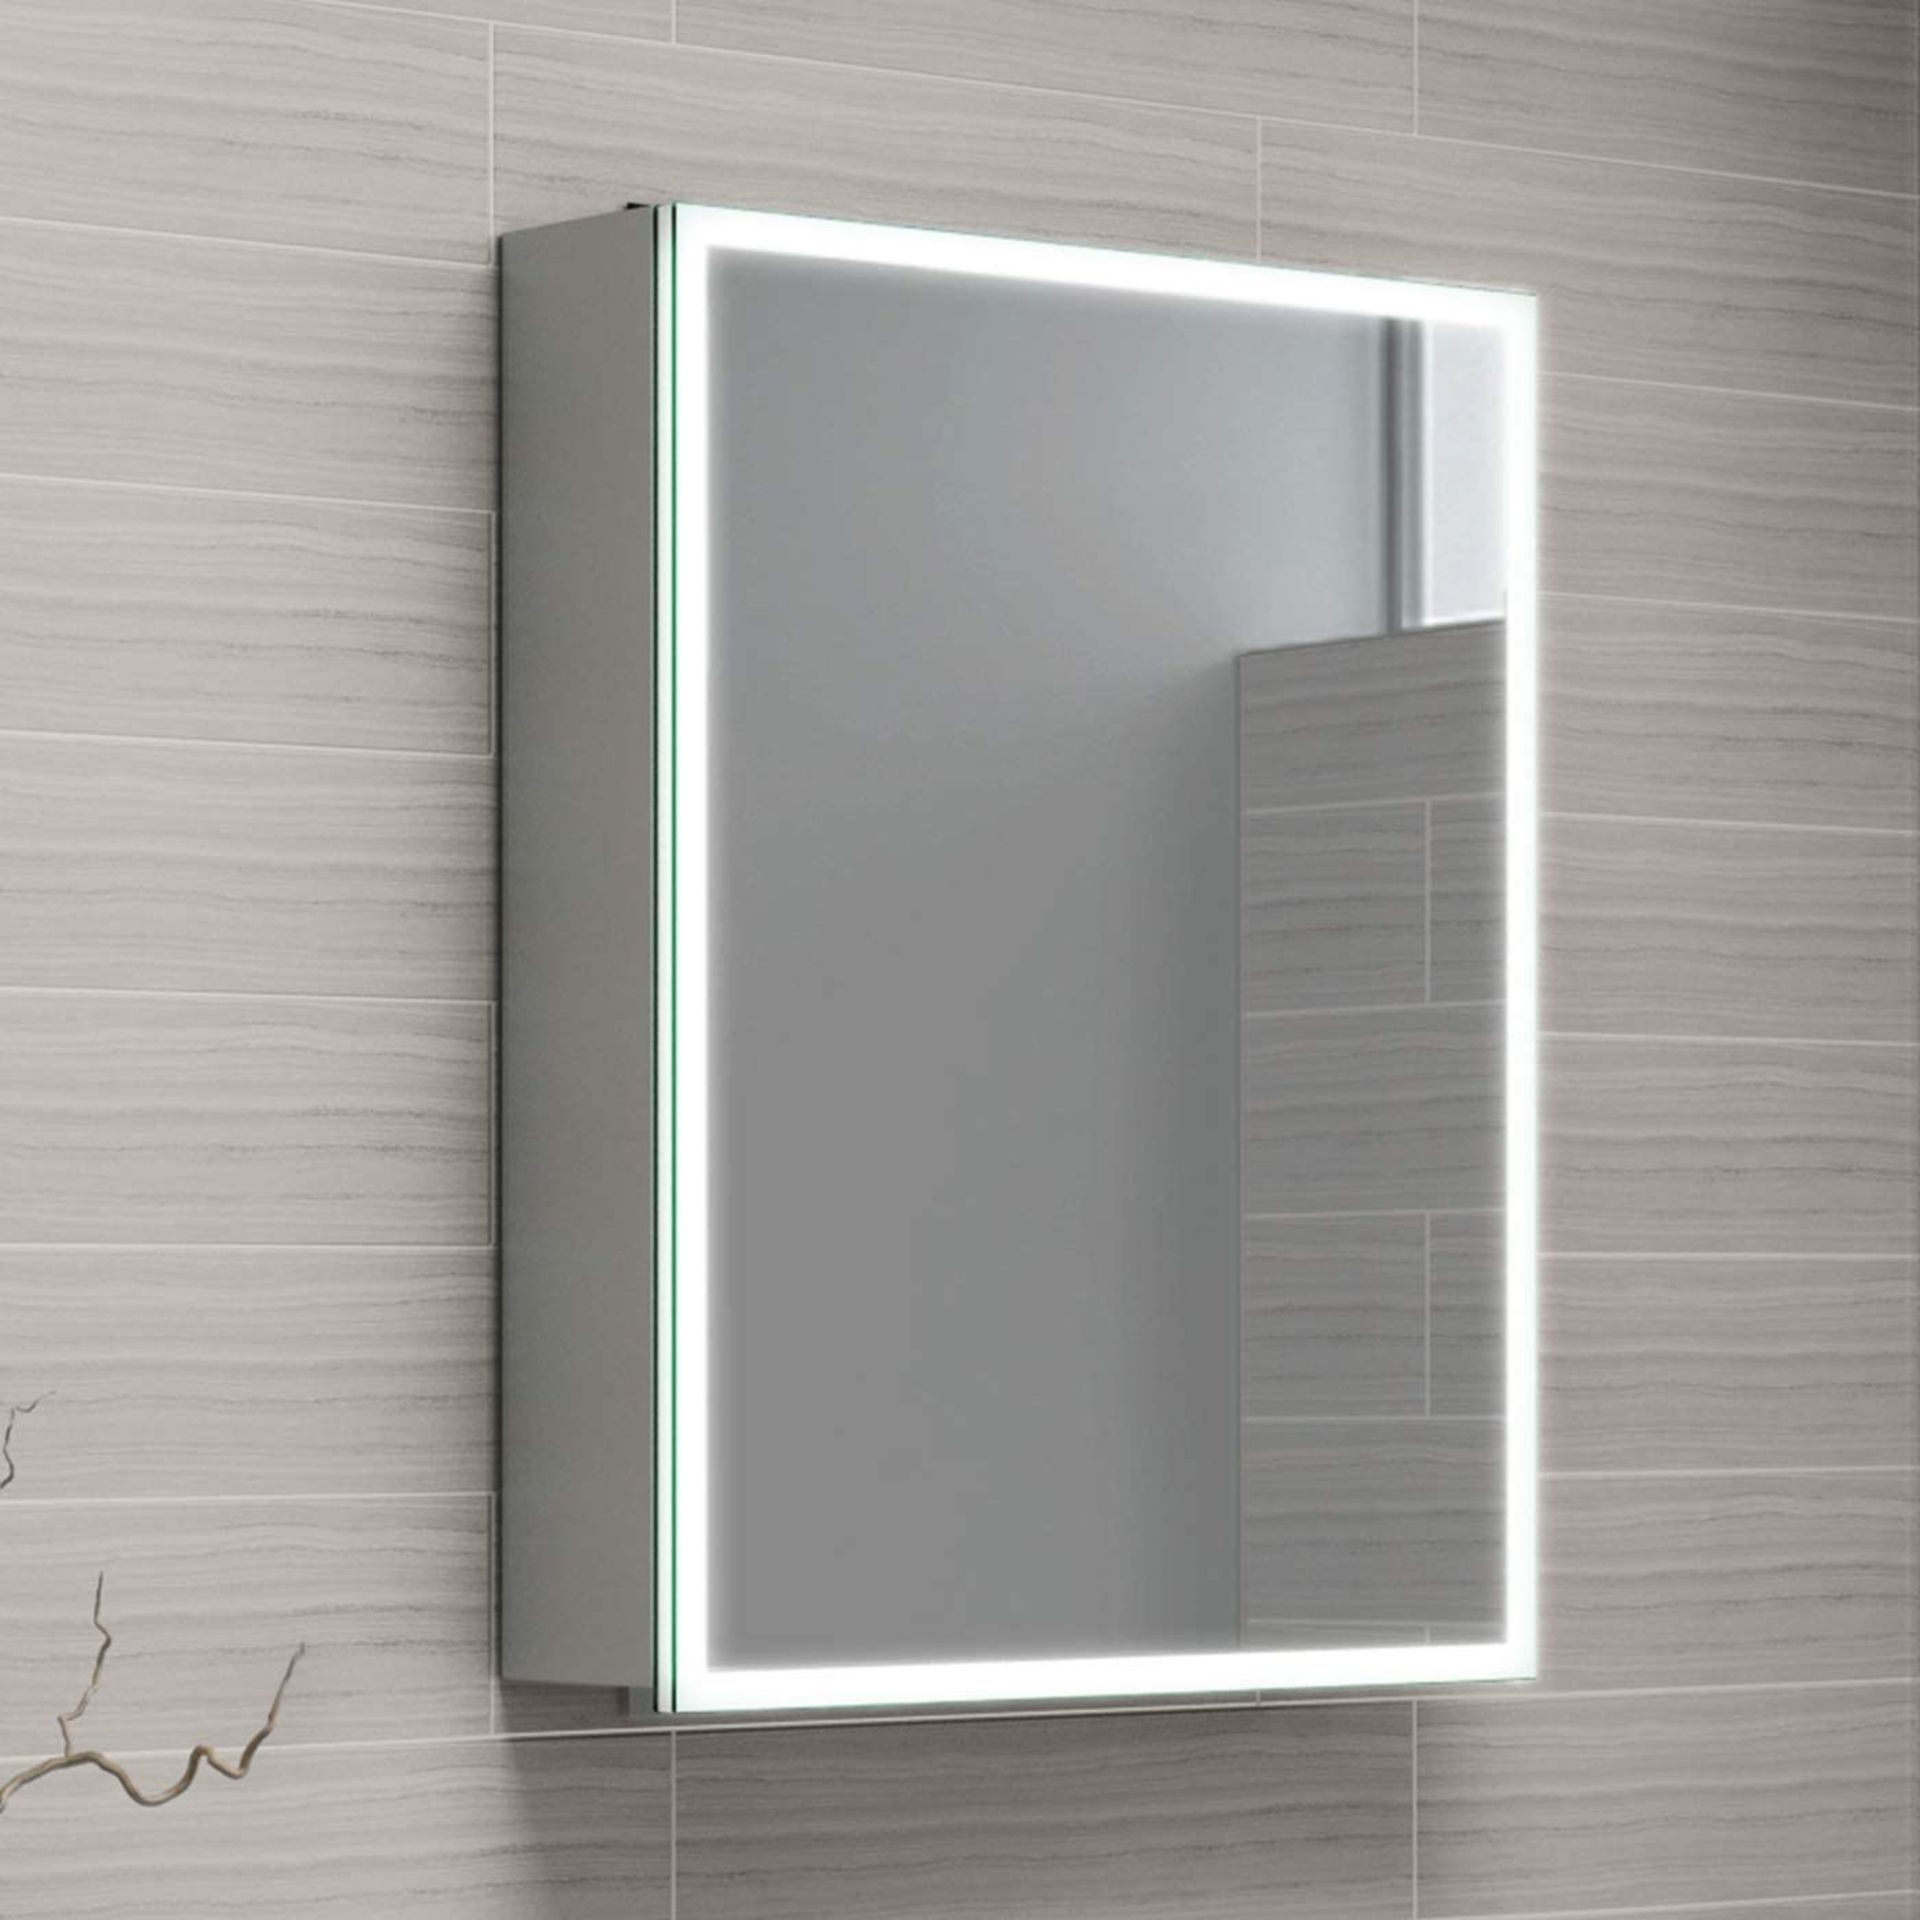 450x600 Cosmic Illuminated LED Mirror Cabinet. RRP £499.99.MC161.We love this mirror cabinet ... - Image 3 of 3